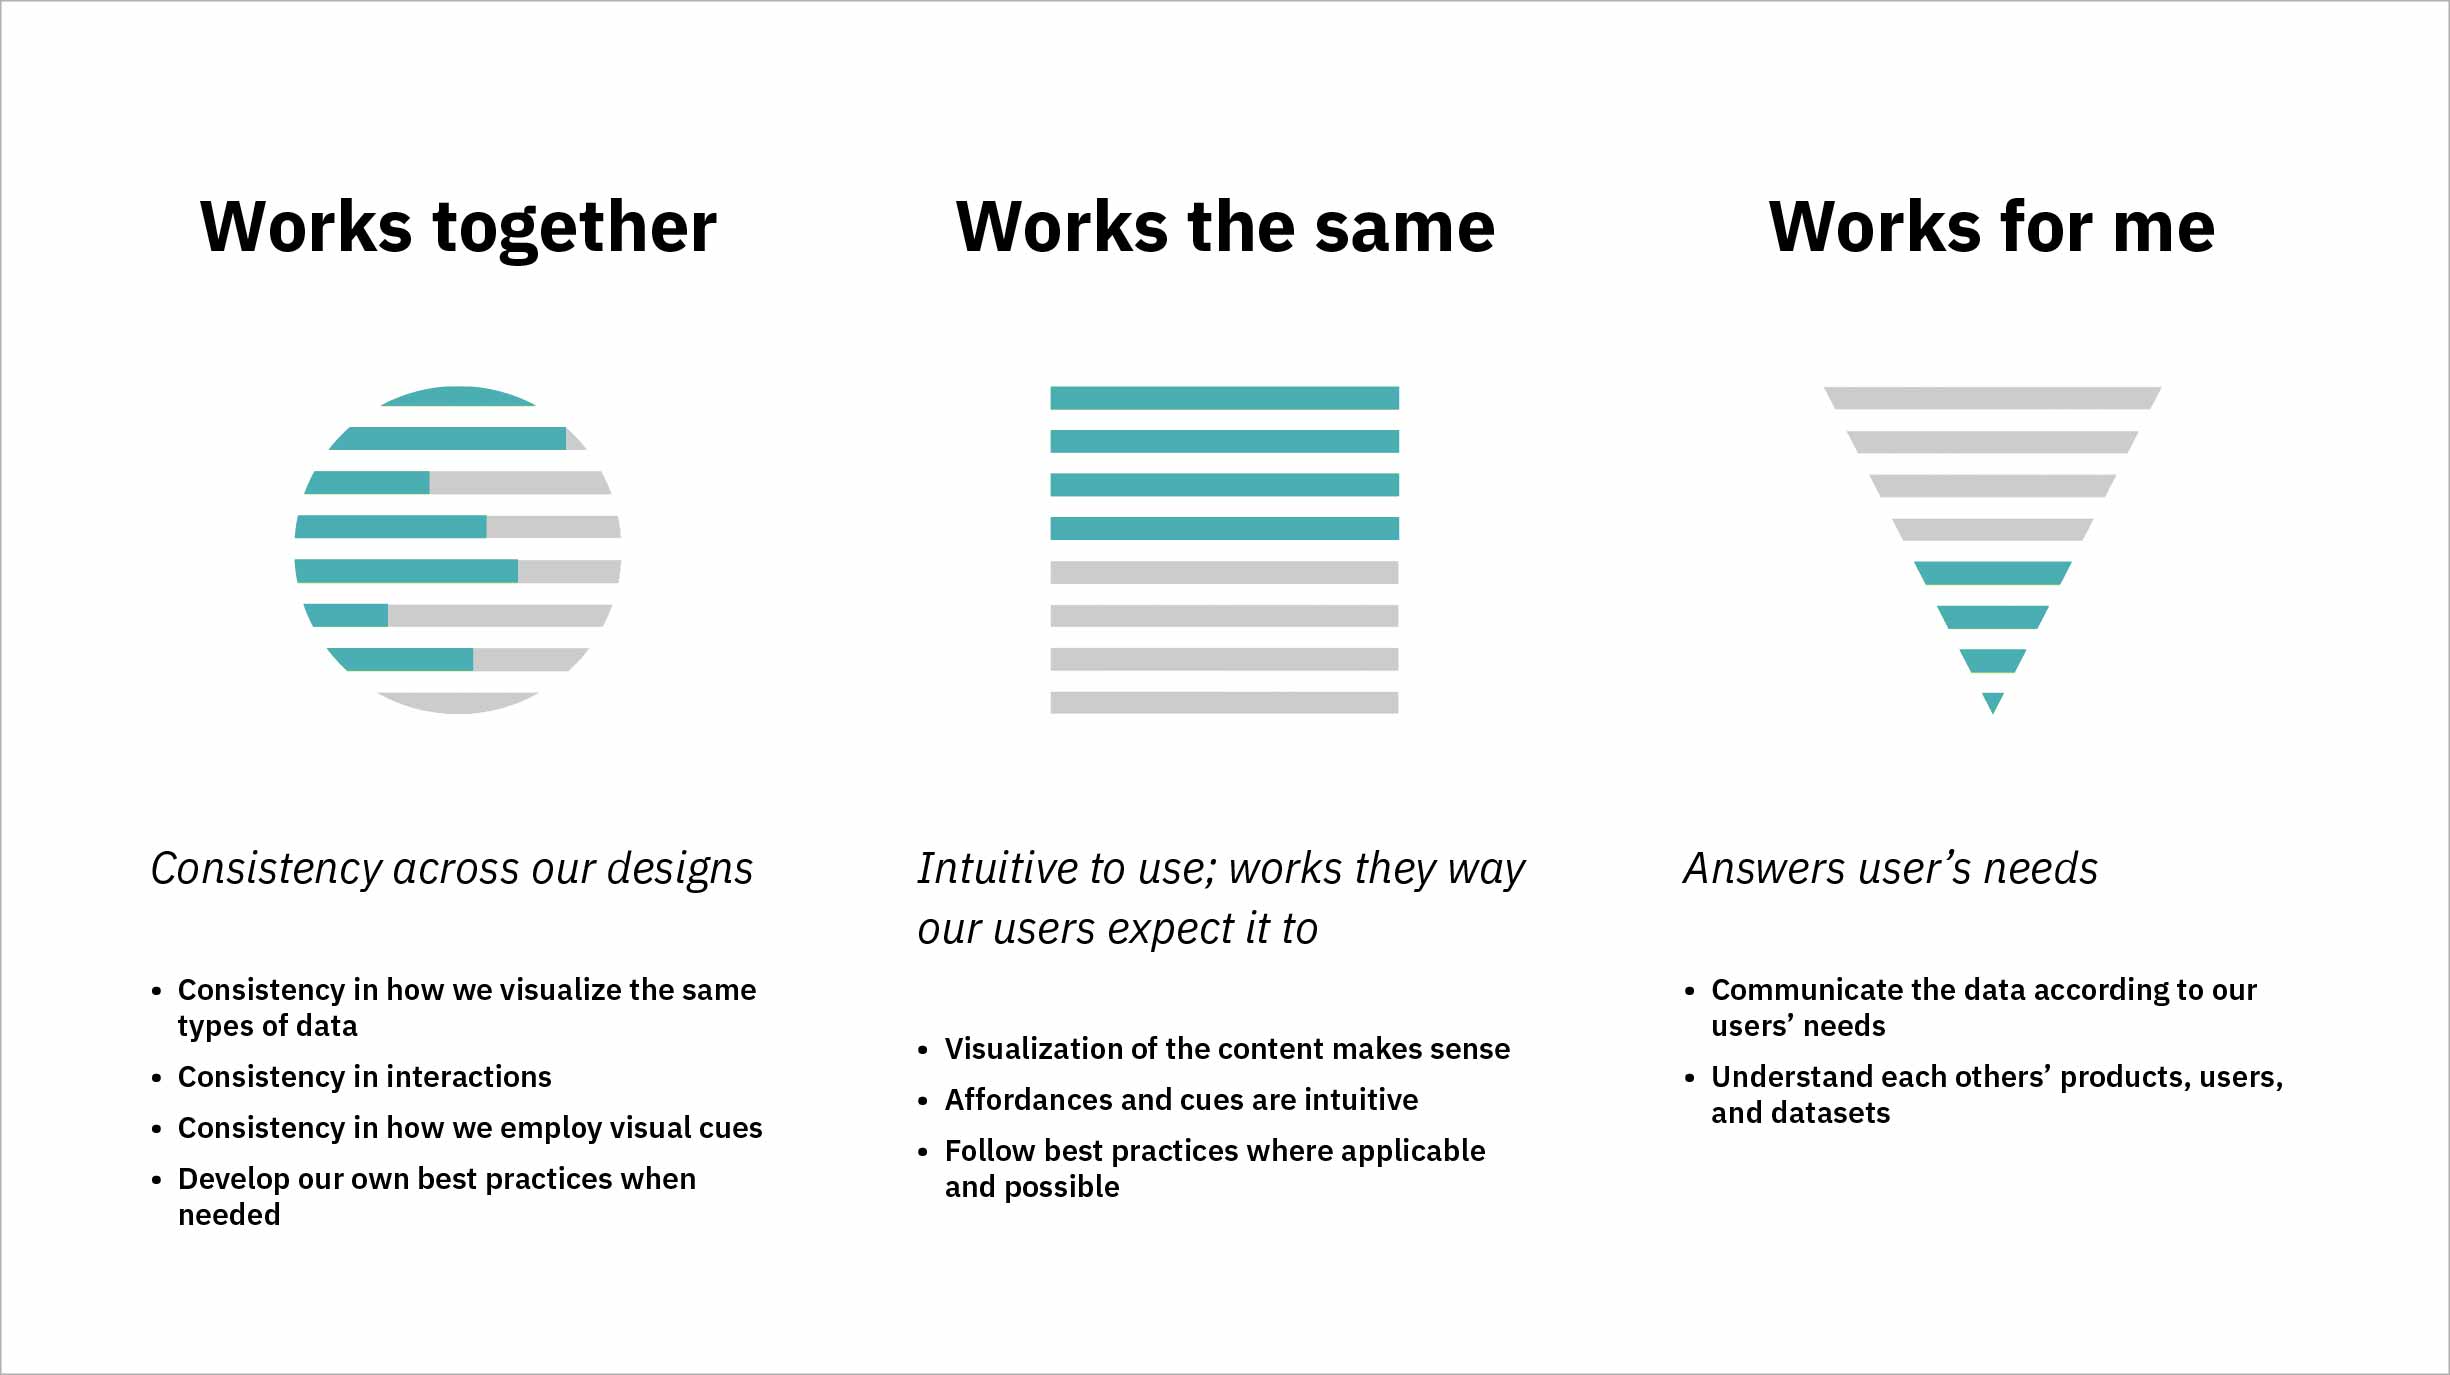 Works together means having consistency across our designs. Works the same means our designs are intuitive to use, and that they work the way our users expect them to. Works for me means that our designs and the outcomes they produce answer our users' needs.